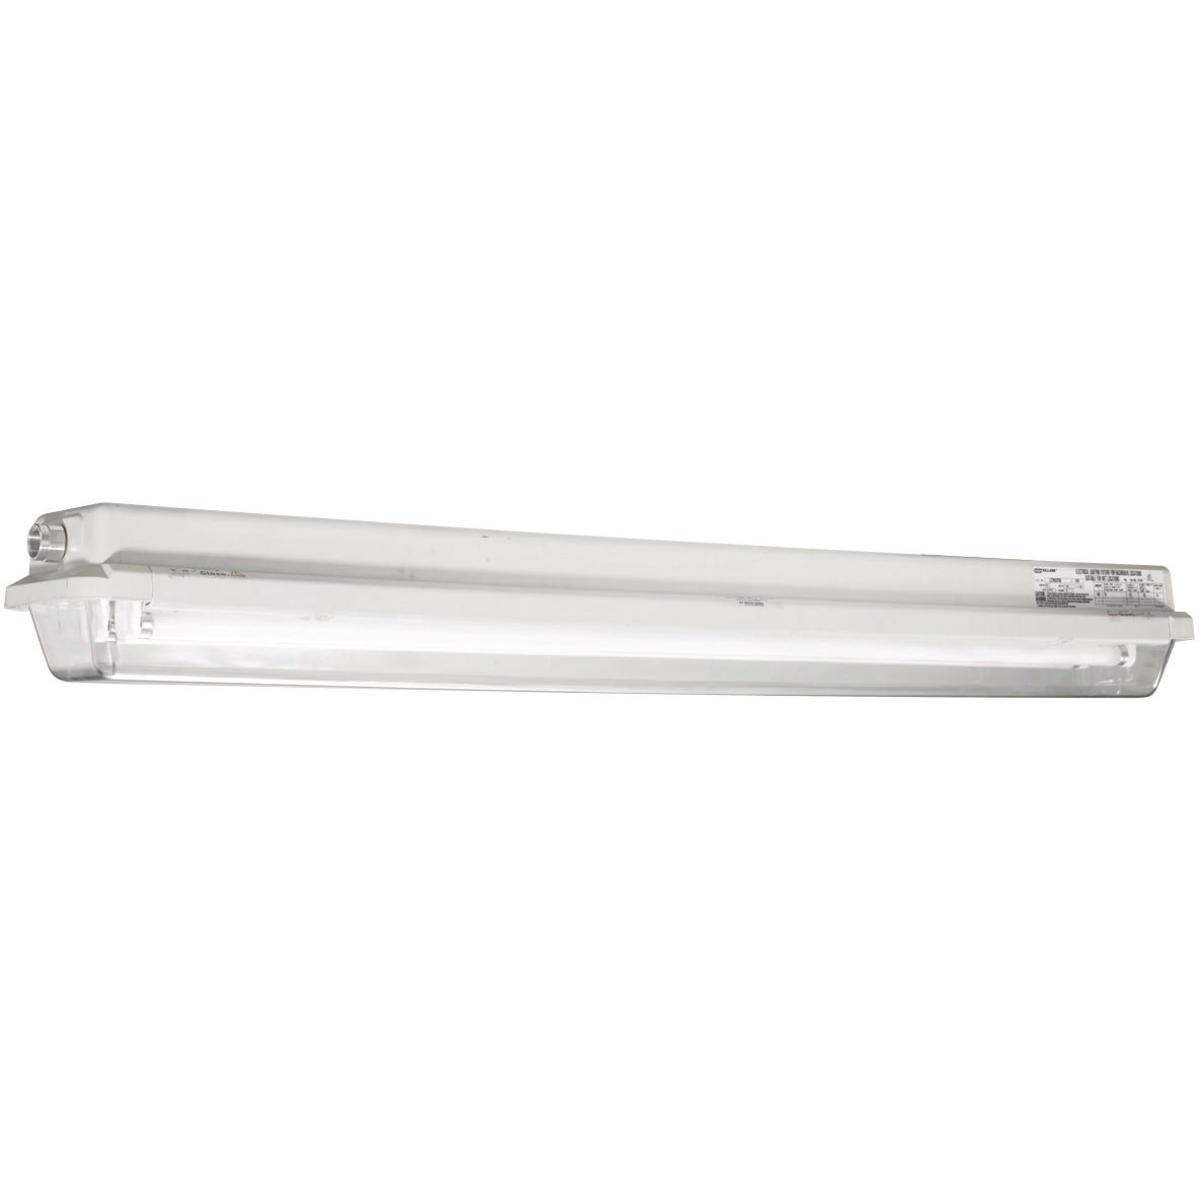 Hubbell LZ2N32330-55C LZ2N Series- 32W 120-277V - 4' 3-Lamp T8 - Electronic 50/60 Hz 0°F Start Medium Bi-Pin - 55C Ambient Suitable  ; Lexan® Clear Lens, impact resistant polycarbonate ; Housing-one piece fiberglass reinforced polyester, NEMA 4X & IP66 rated. ; Two 3/4” NTP al